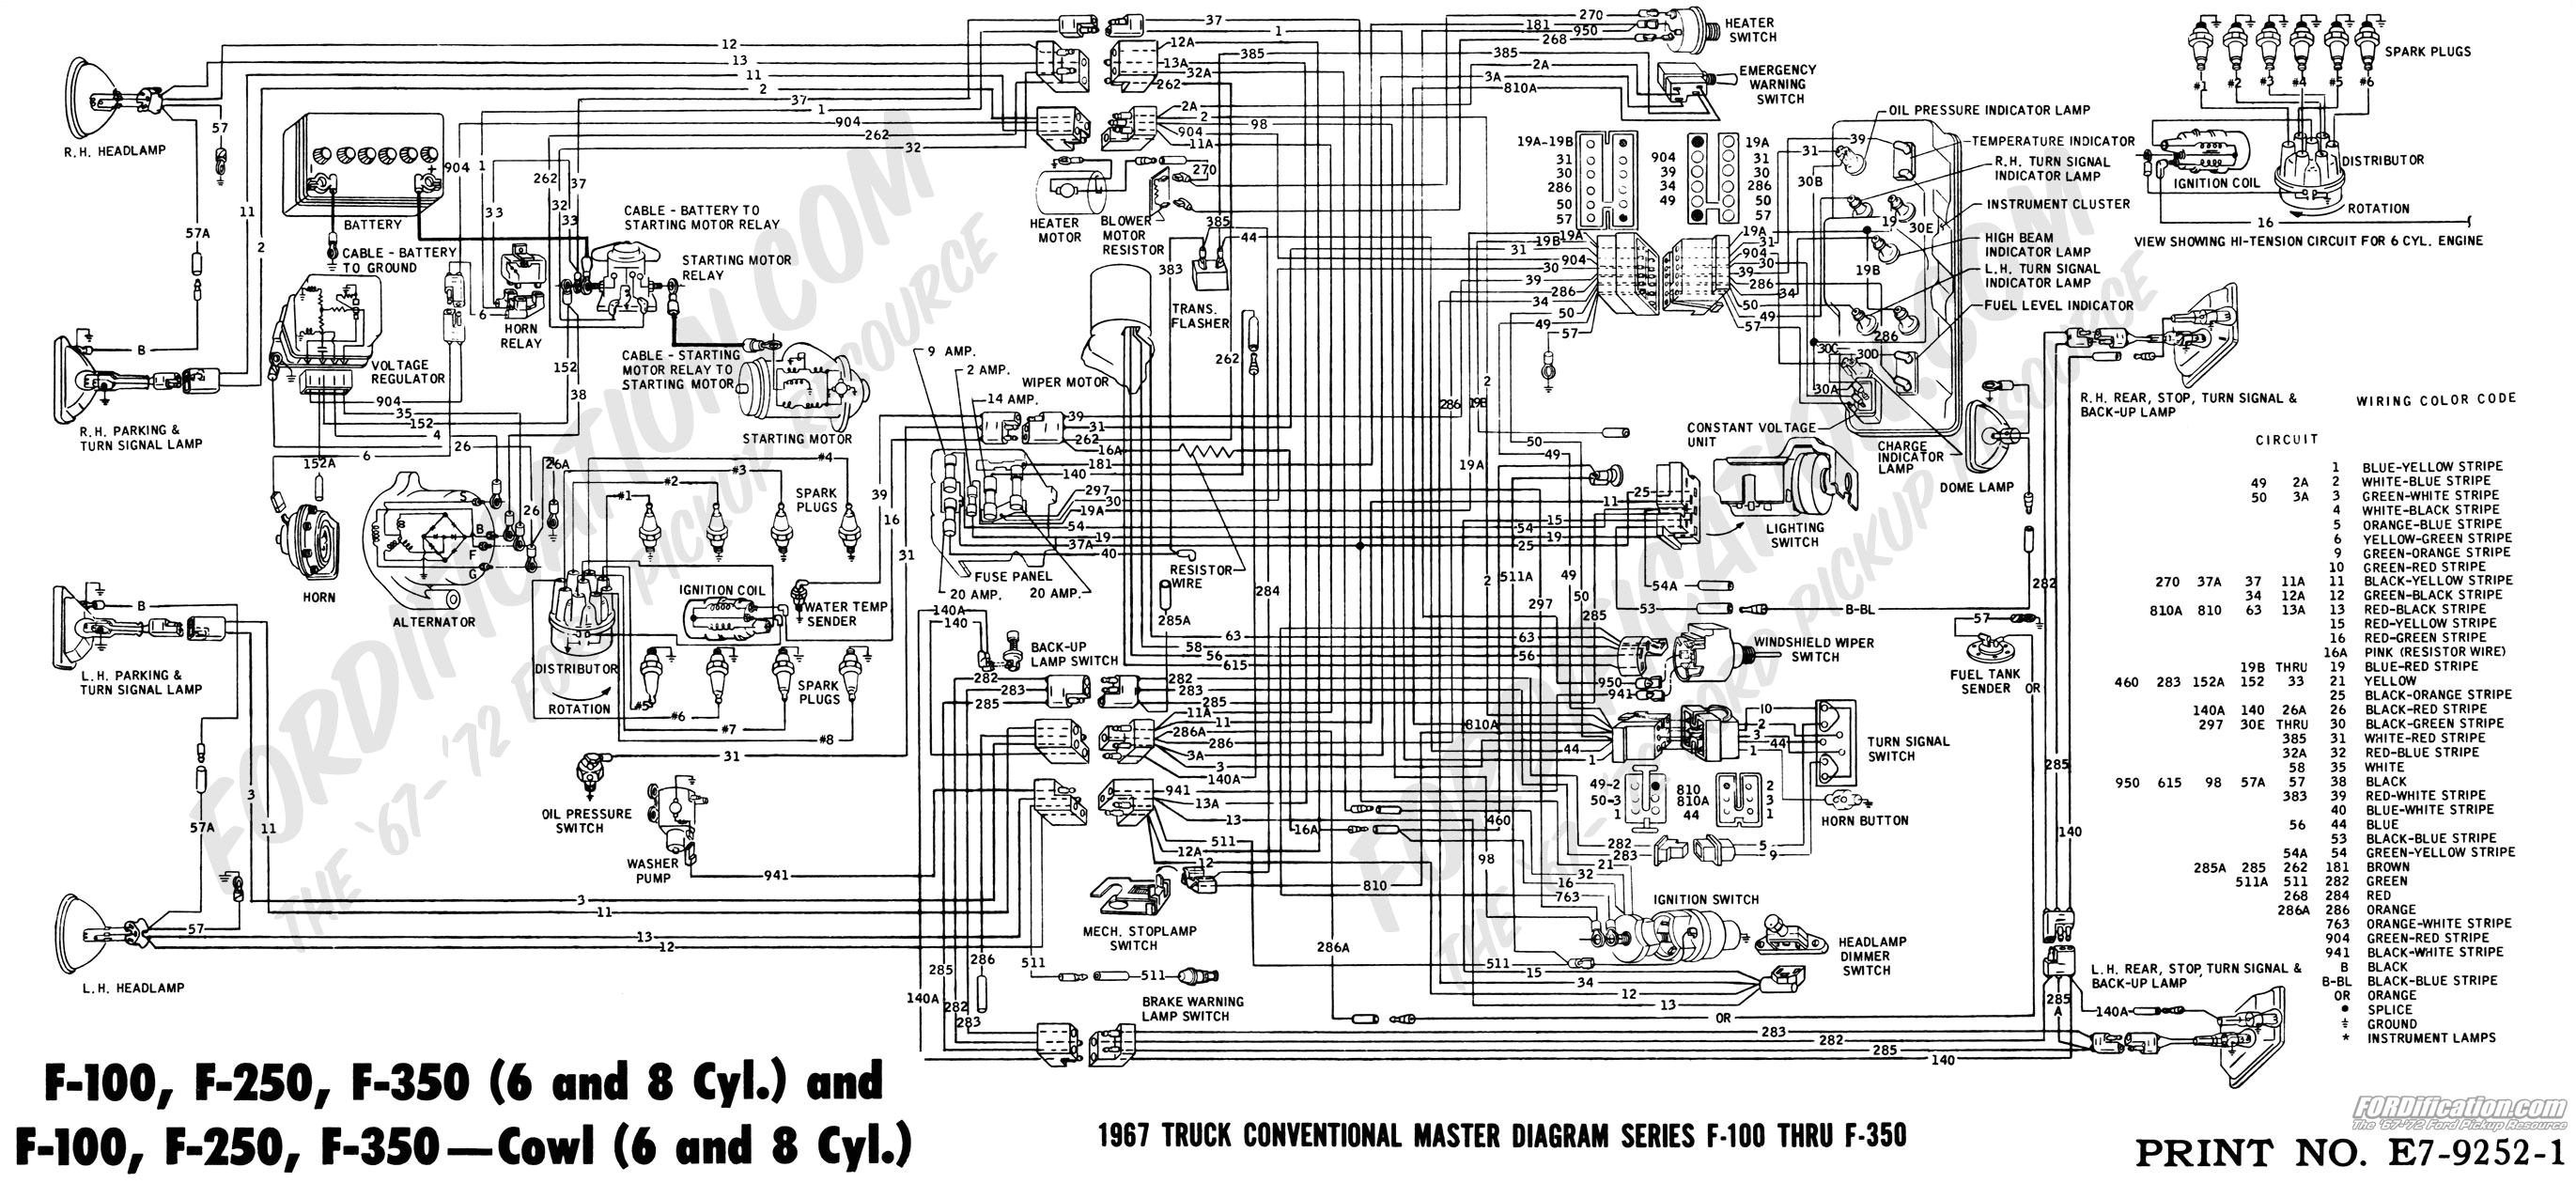 ford f150 wiring chart wiring diagram toolbox 1973 ford truck wiring diagram